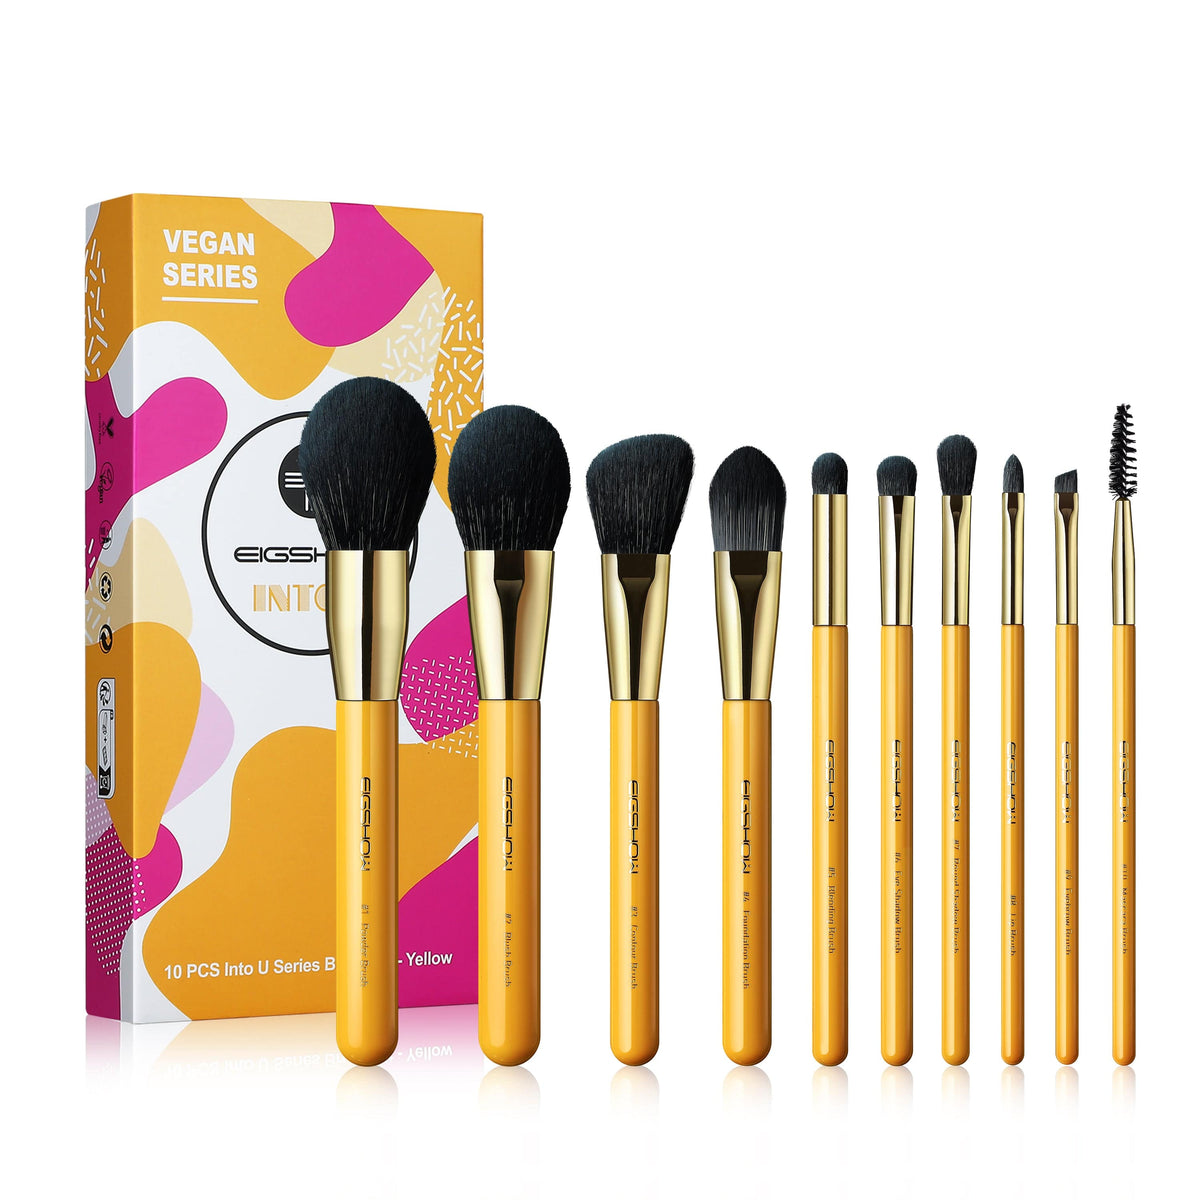 Brush Egg Makeup Brush Cleaner Review + Demo - Deck and Dine